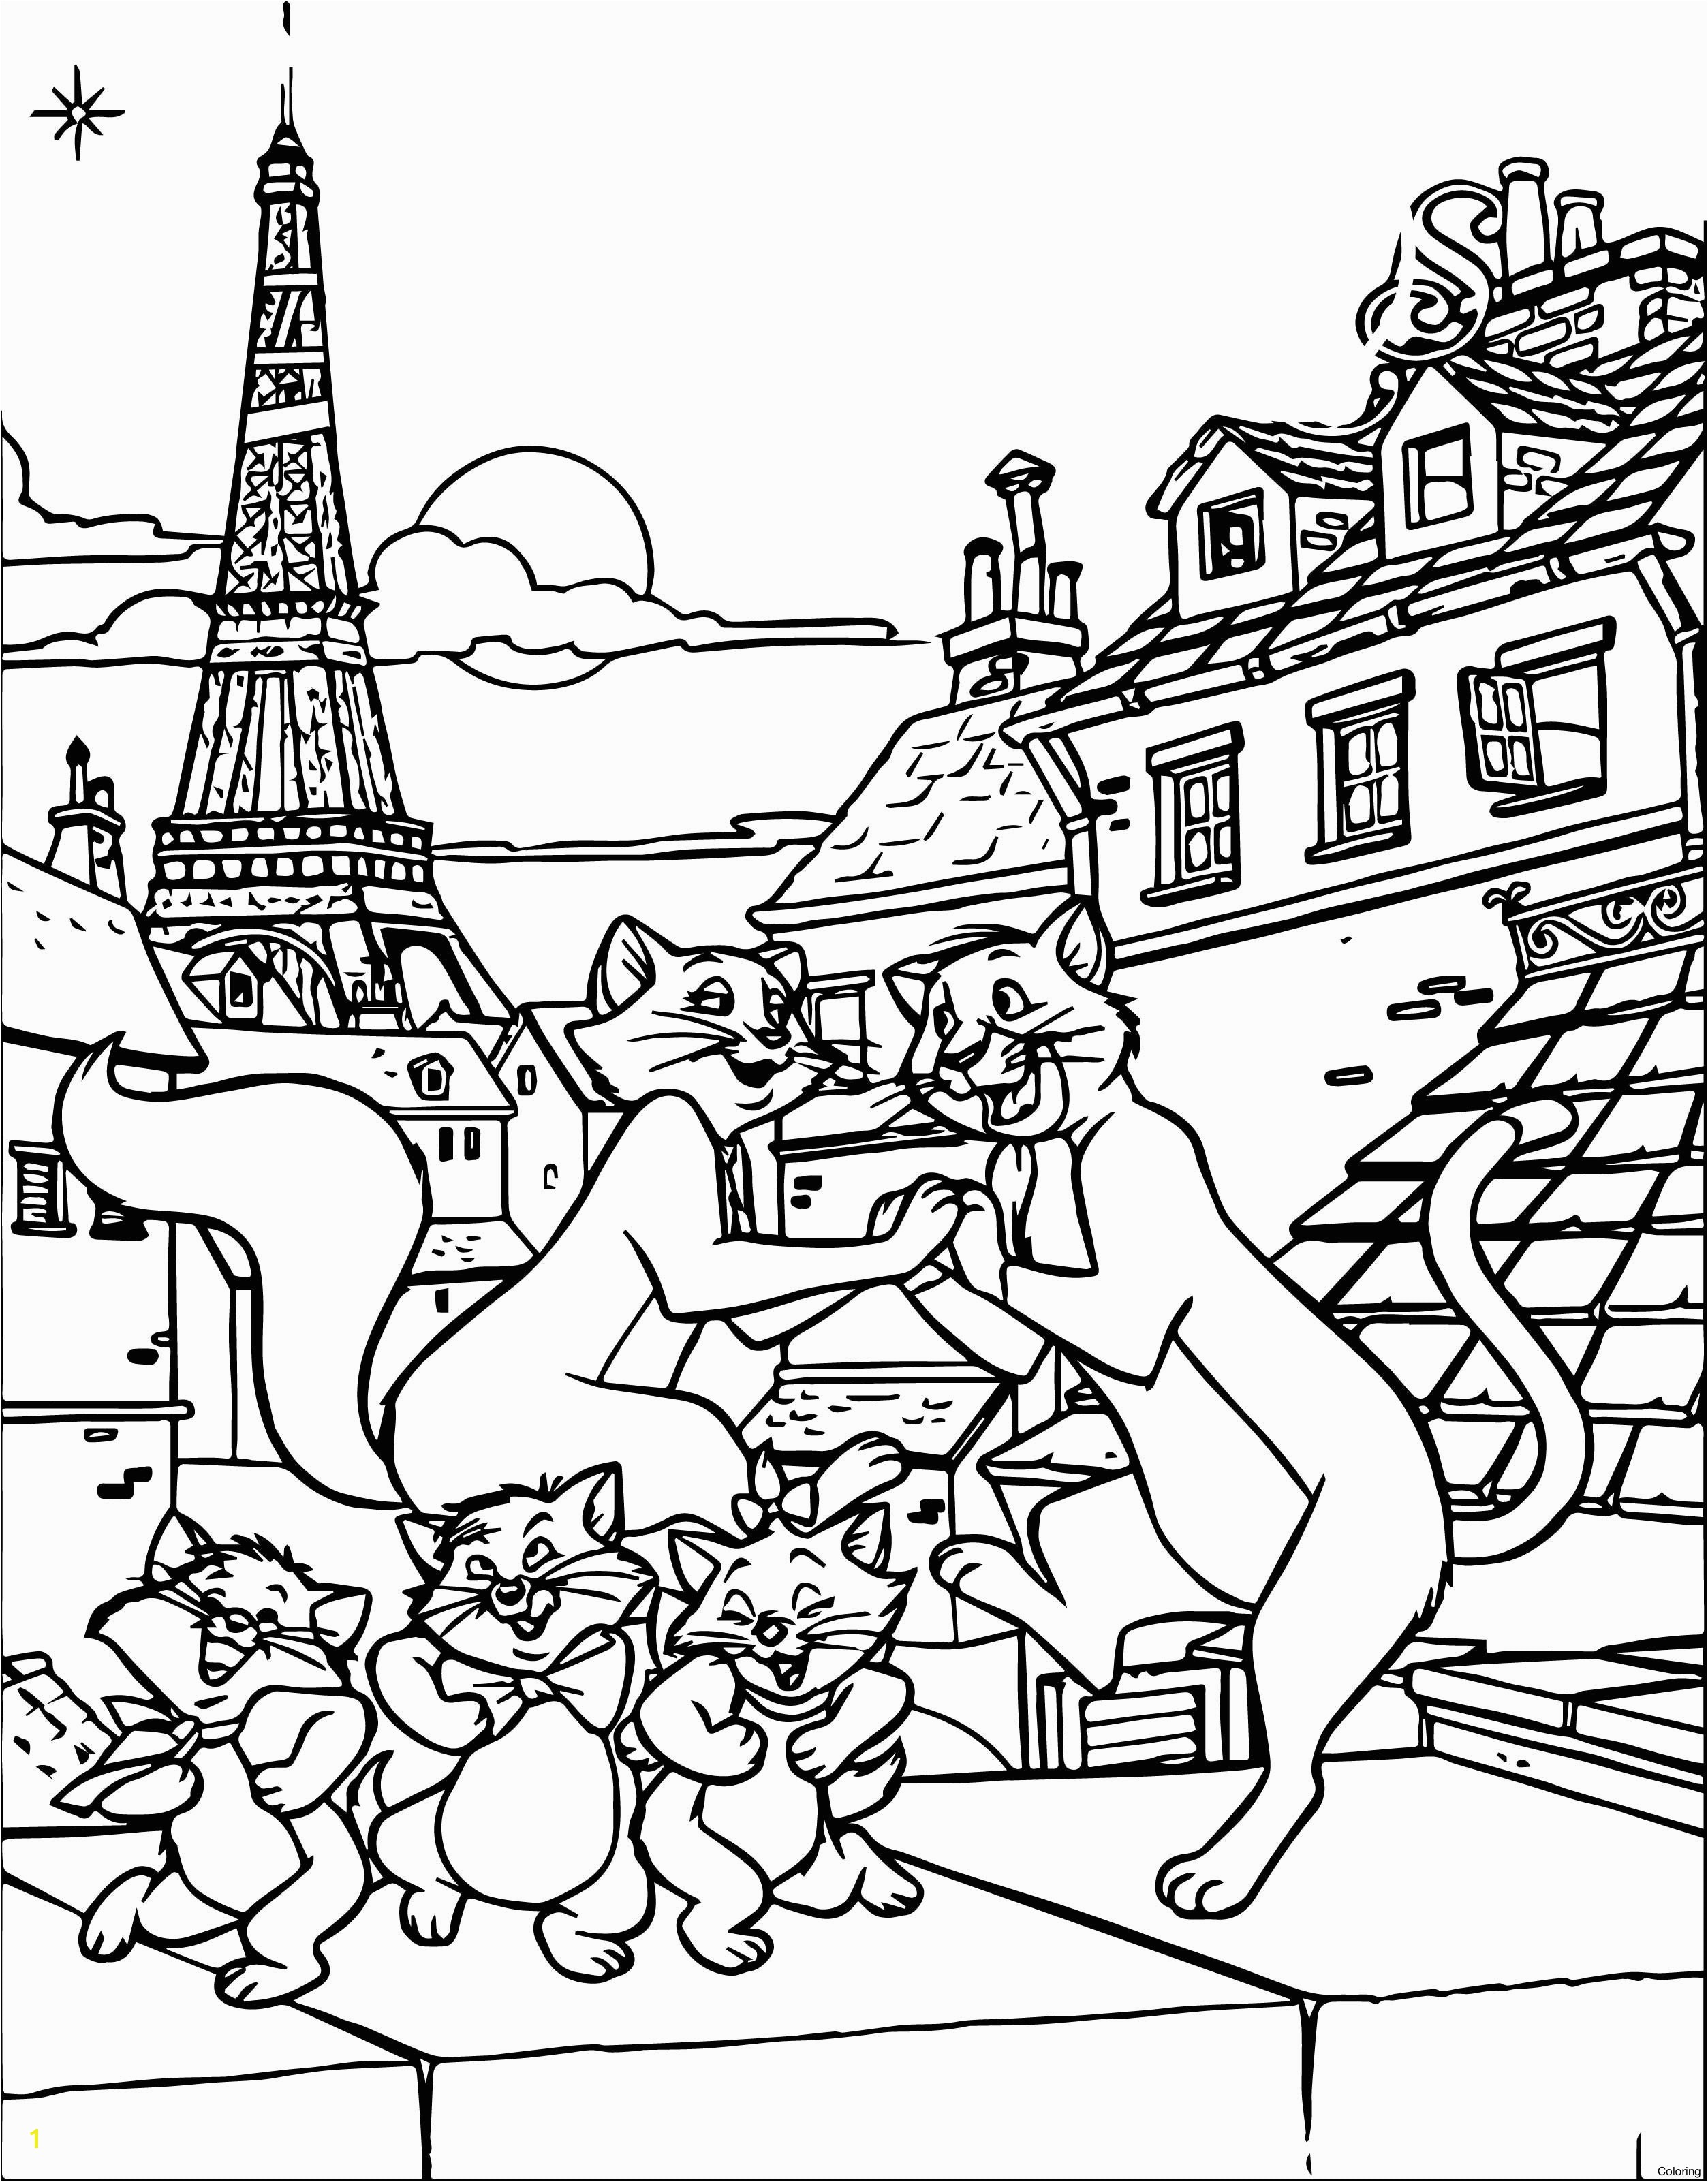 Ratatouille And Paris Coloring Pages For Kids Lovely New